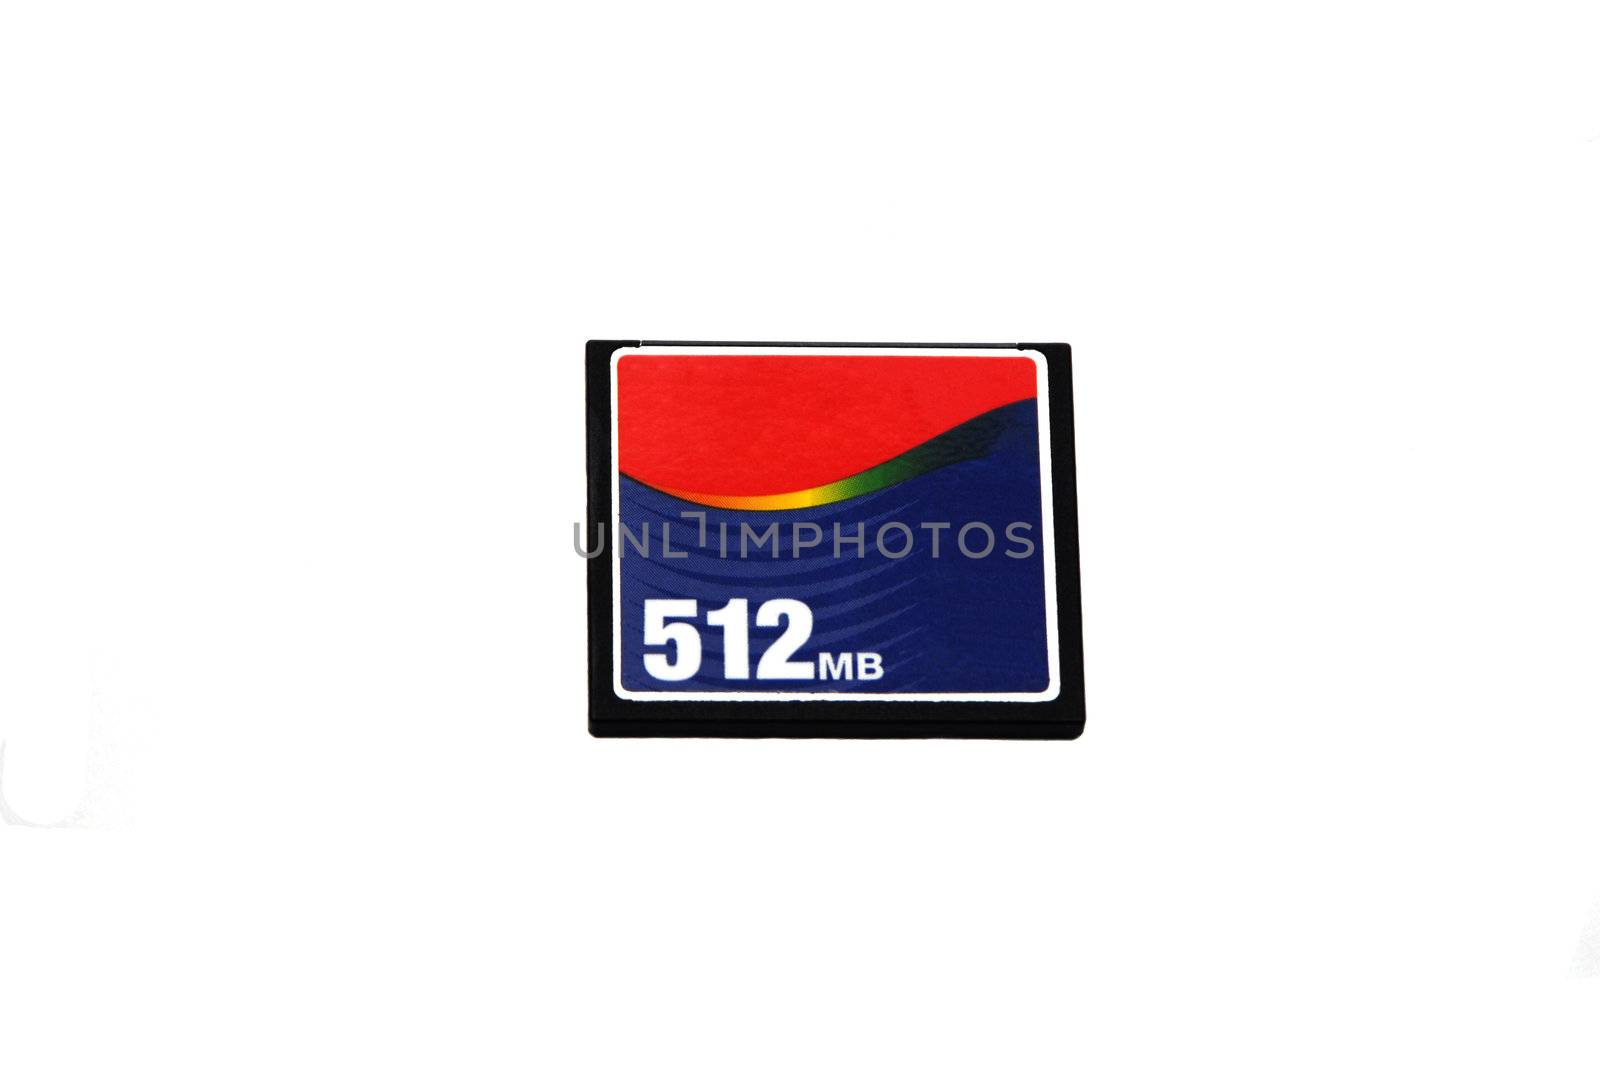 A memory card isoalted on a white background